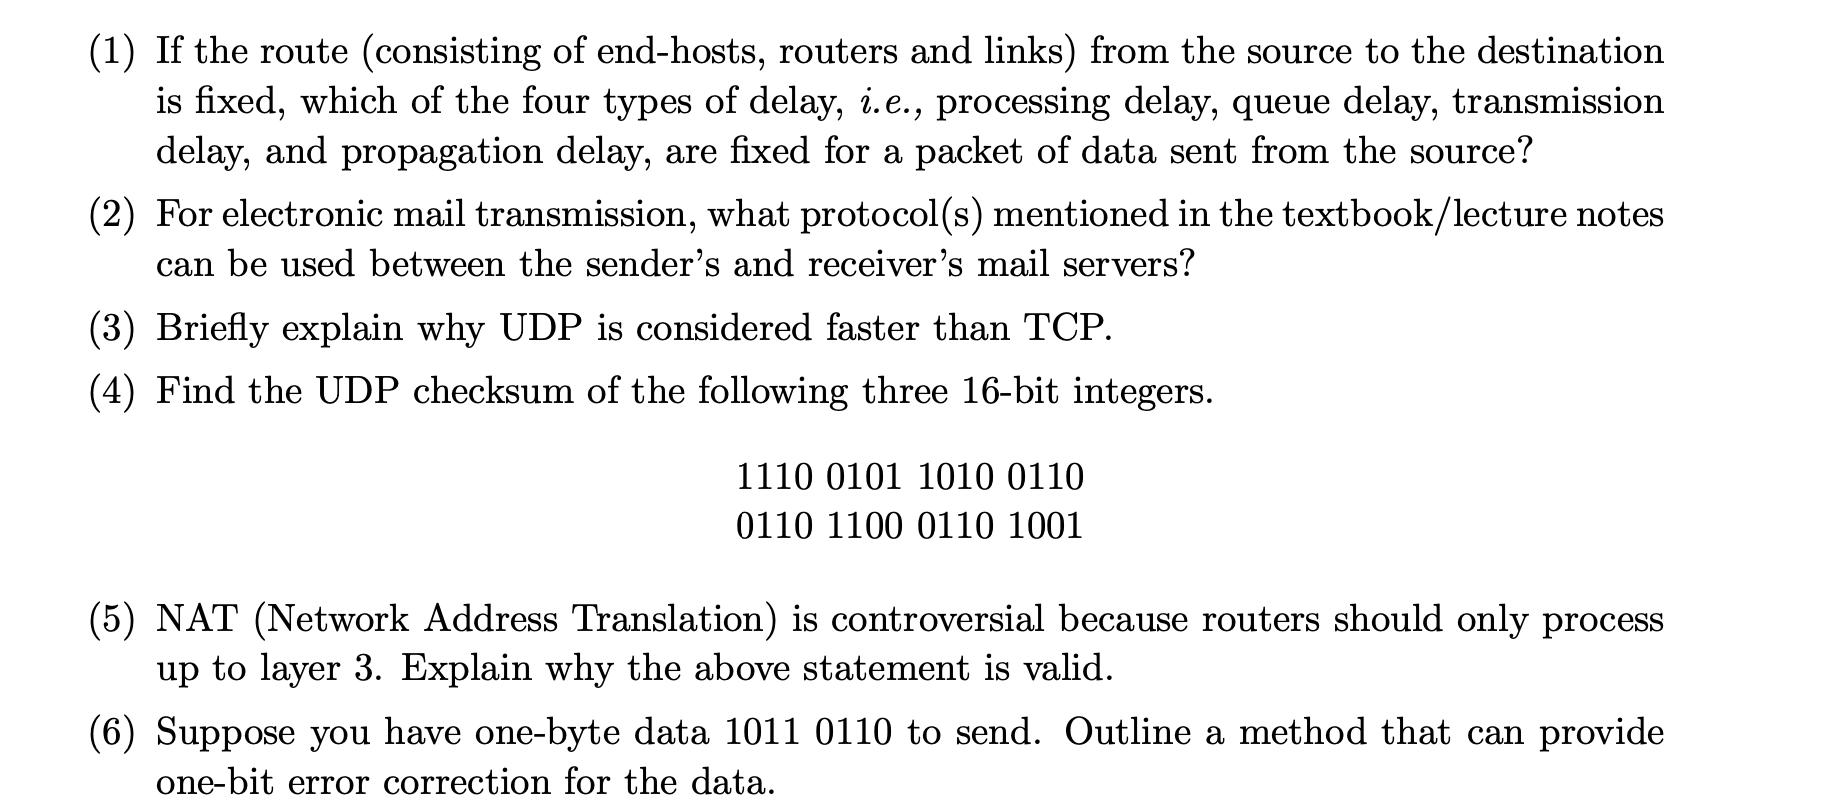 (1) If the route (consisting of end-hosts, routers and links) from the source to the destination is fixed,